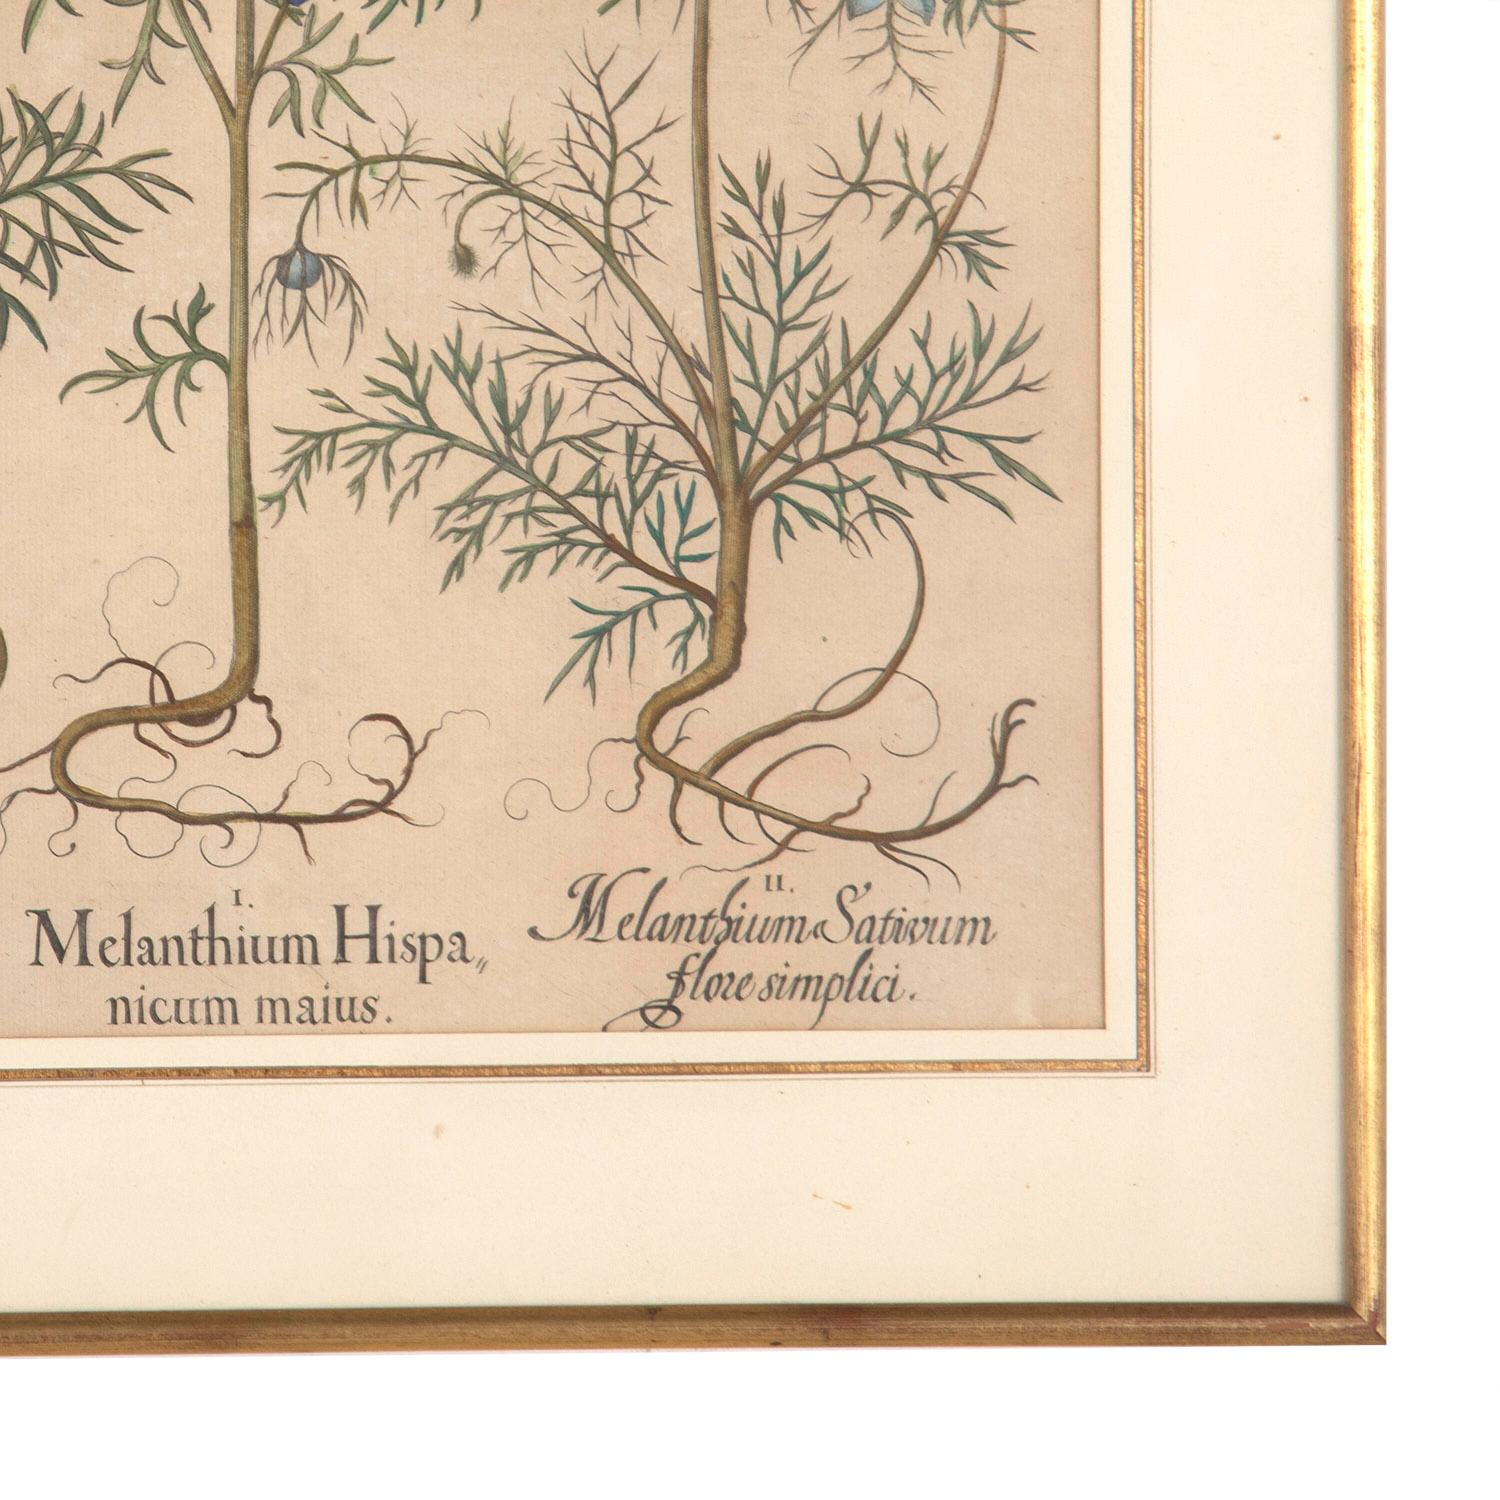 When Johann Konrad von Gemmingen, Prince Bishop of Eichstaedt (a place about 60 kilometers north of Munich) gave the Nuremberg apothecary and botanist Basilius Besler (1561-1629) the order to publish a book with engravings of flowers and plants, he